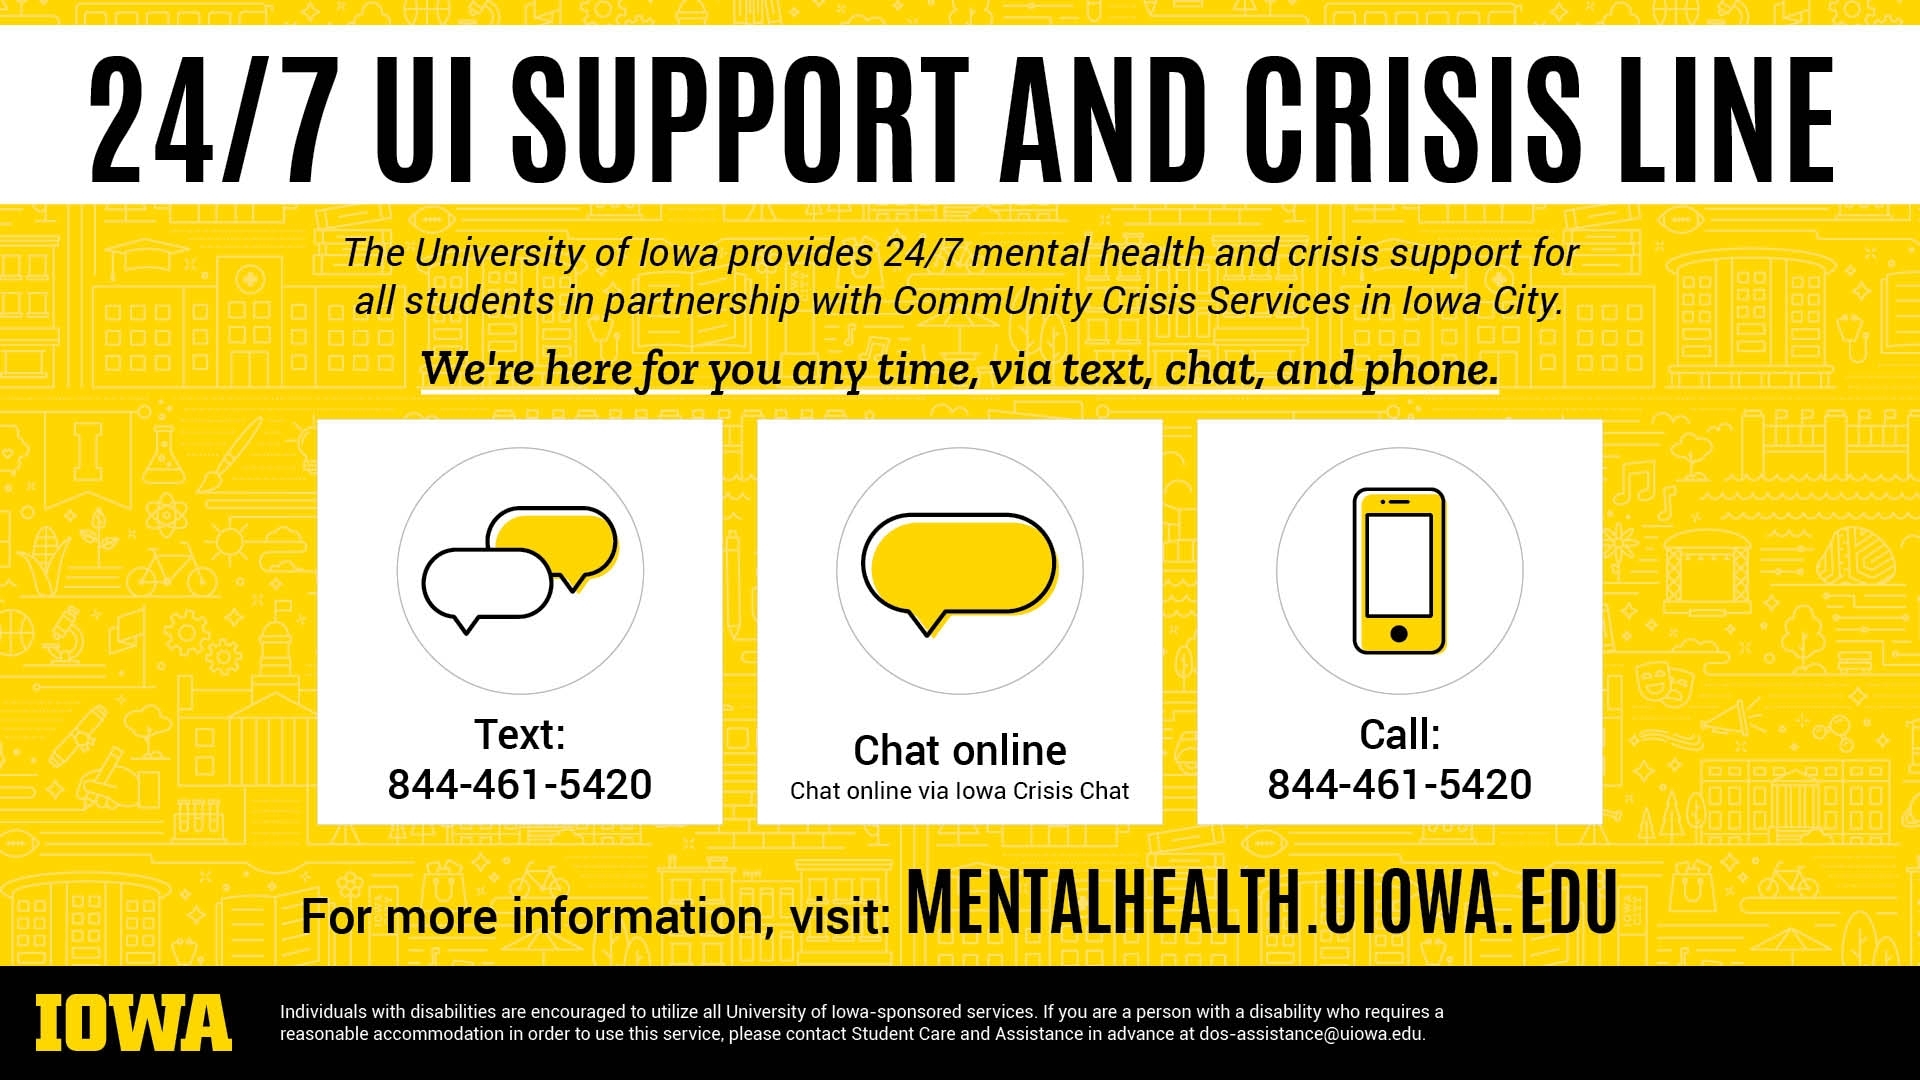 Crisis Hotline 24/7 UI Support and Crisis Line Image 